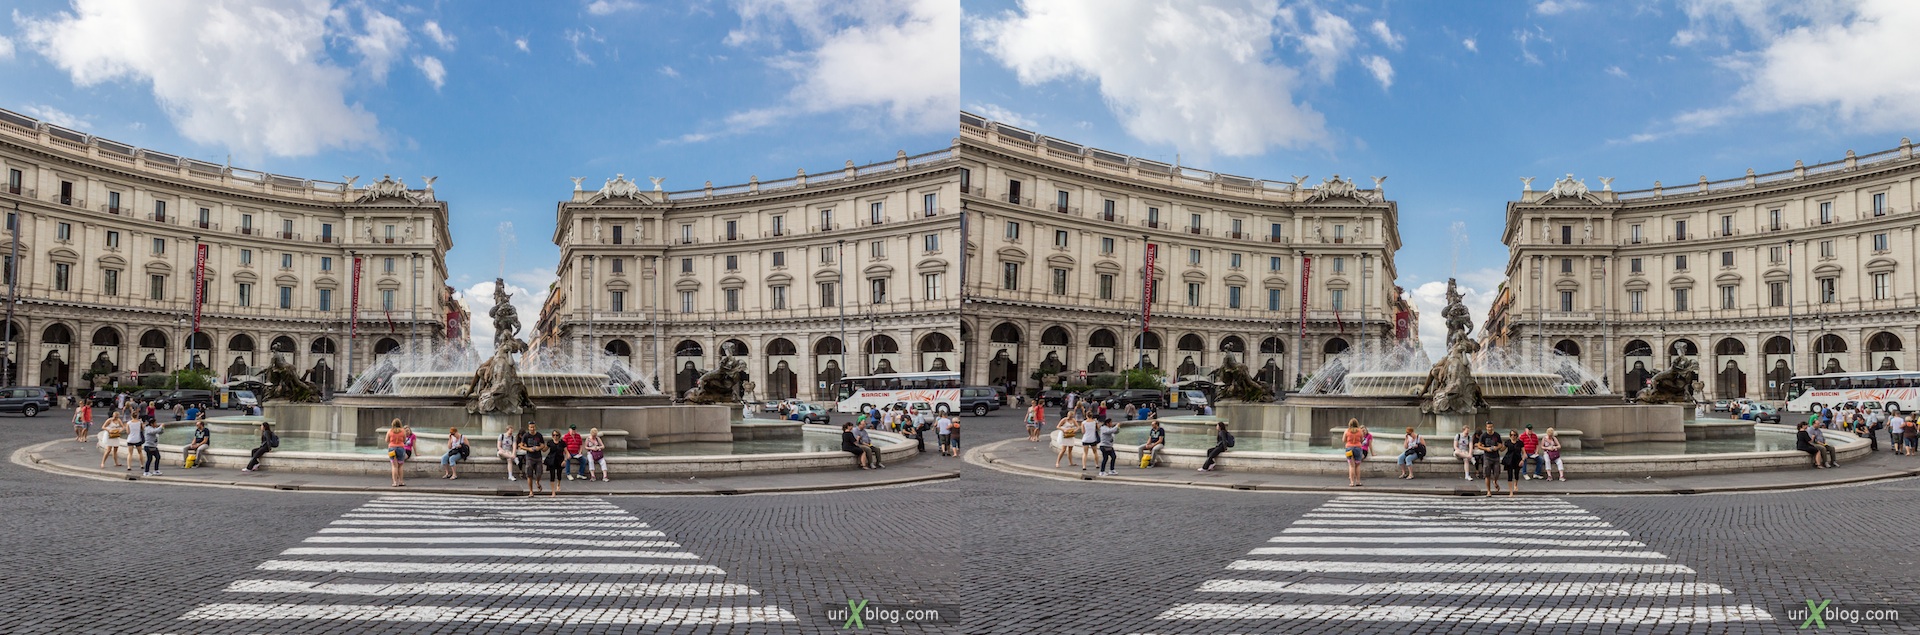 2012, fountain of the Naiads, Piazza della Repubblica, Rome, Italy, 3D, stereo pair, cross-eyed, crossview, cross view stereo pair